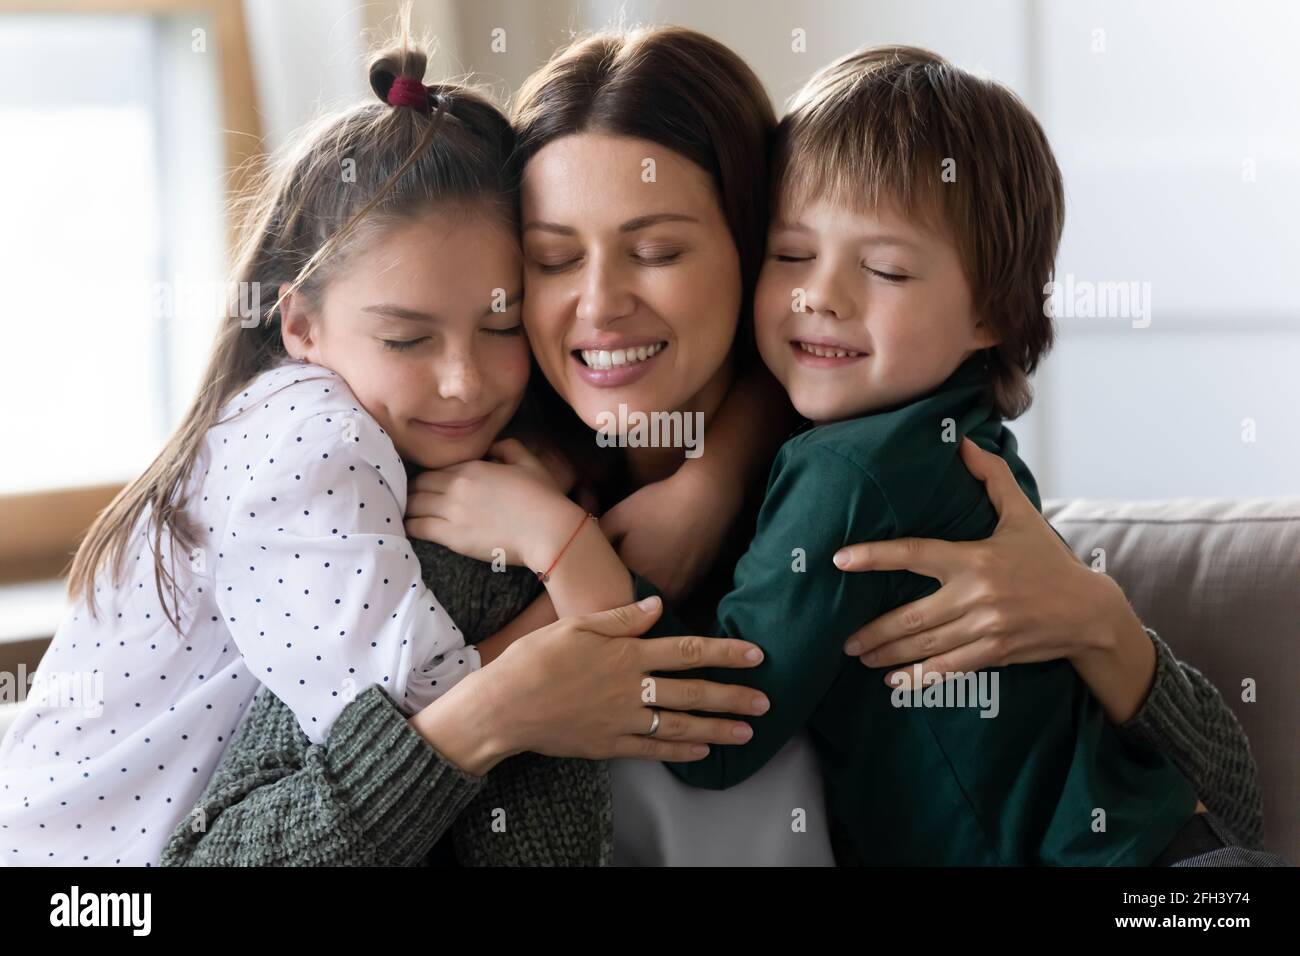 Two little children hug young Caucasian mother Stock Photo